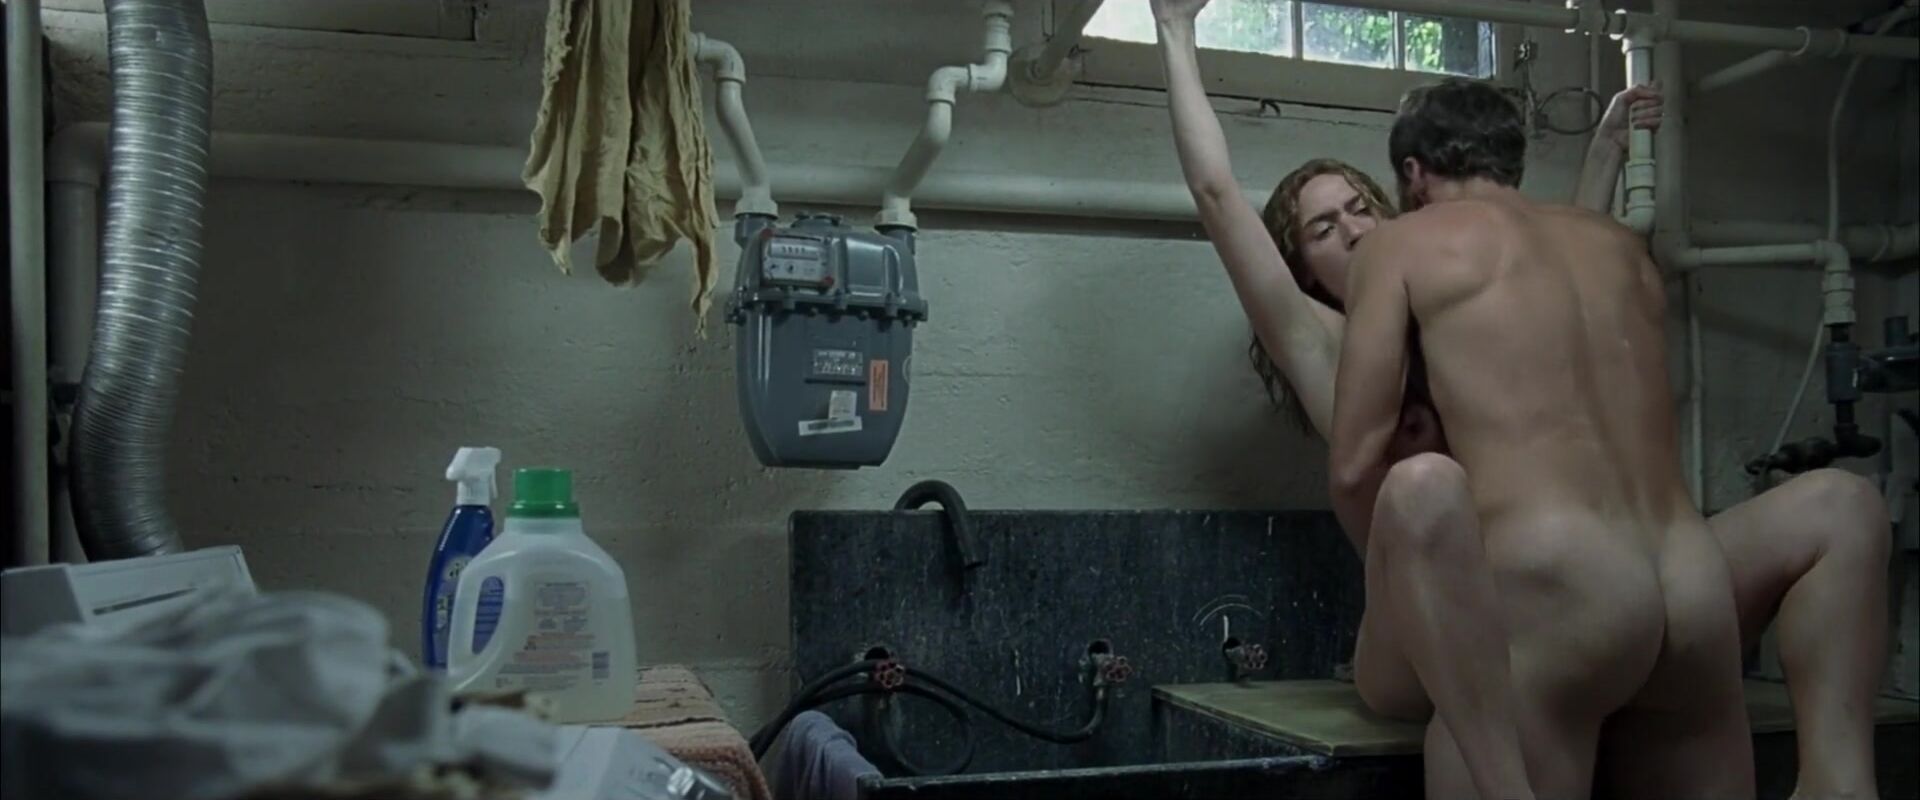 imageweb Little C celebrity Kate Winslet is fucked by Patrick Wilson in their cabin (2006) Body Massage - 1